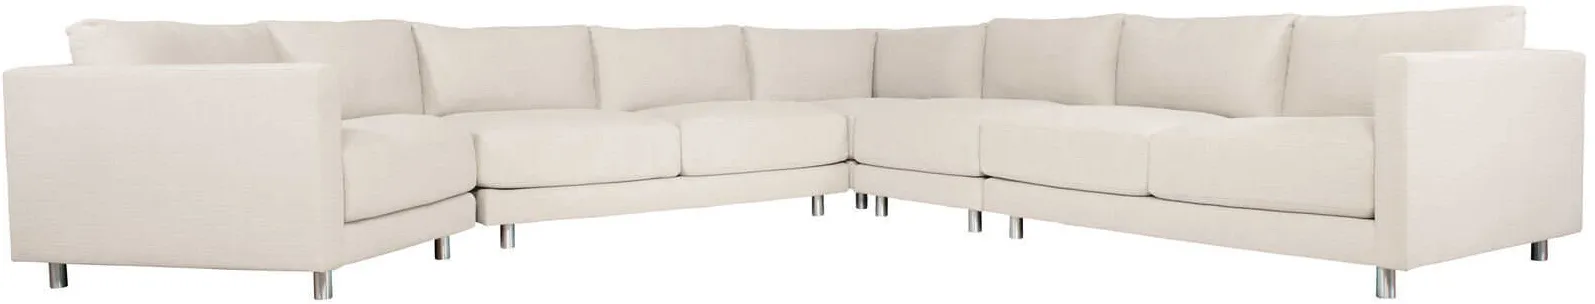 Avanni Sectional